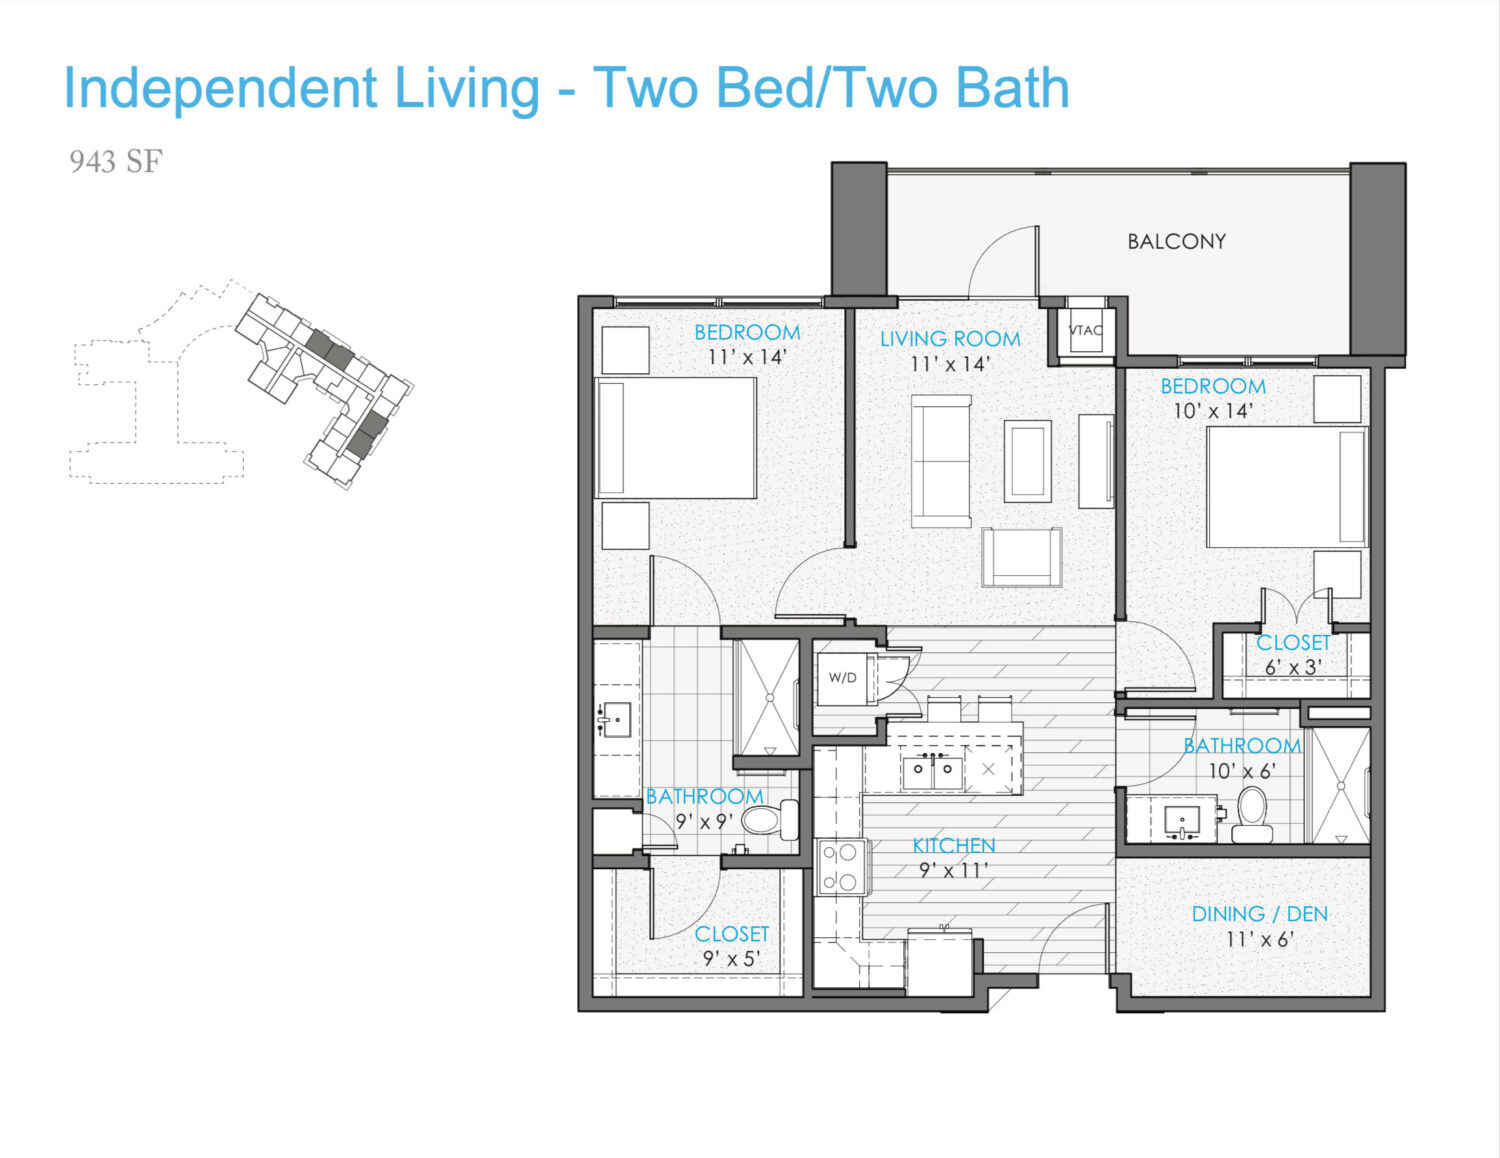 Independent Living Two Bed Two Bath